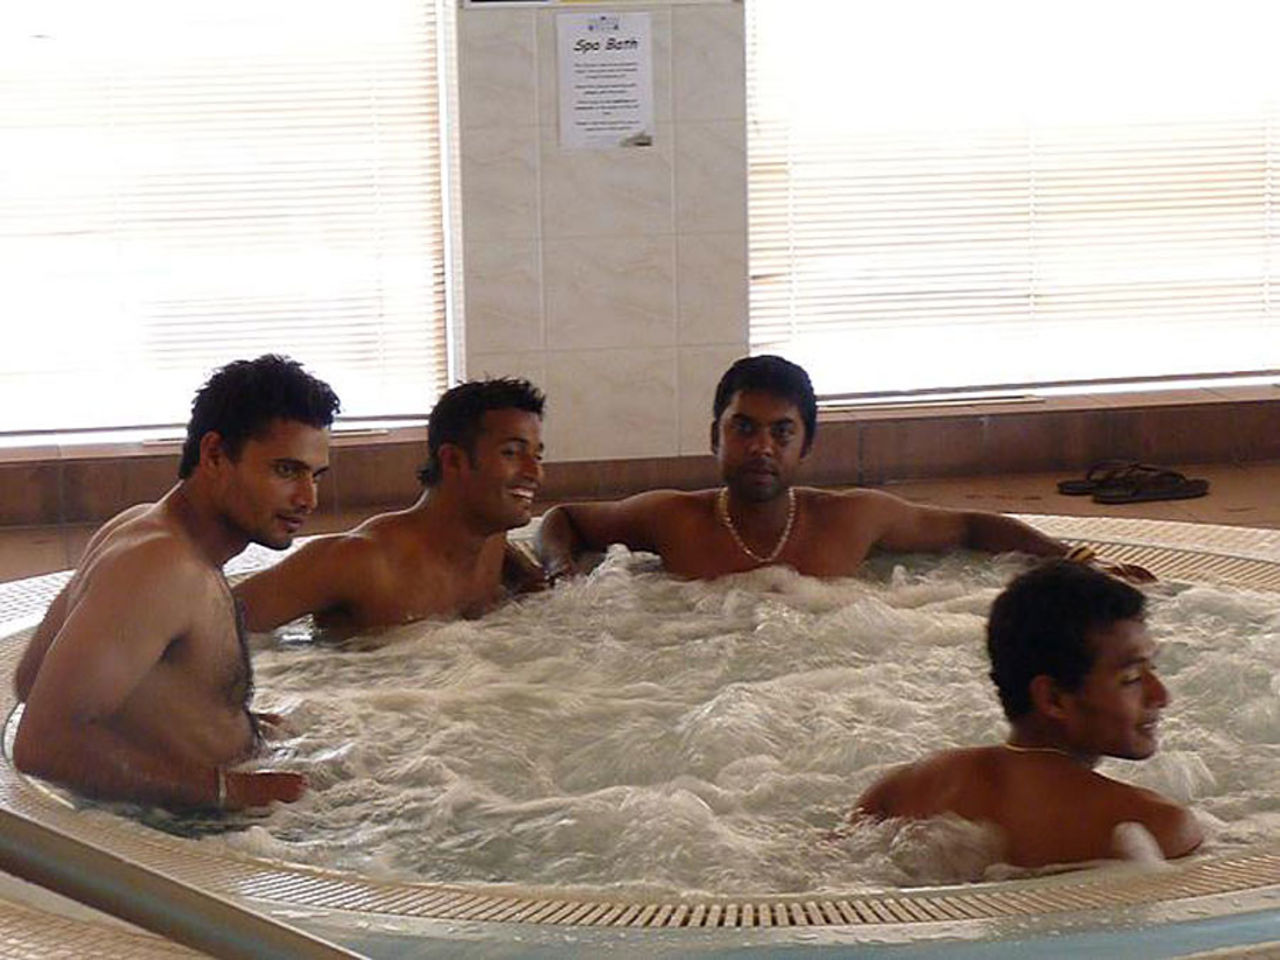 The Bangladesh pace bowlers coo off in the jacuzzi after practice in Glasgow, July 18, 2010